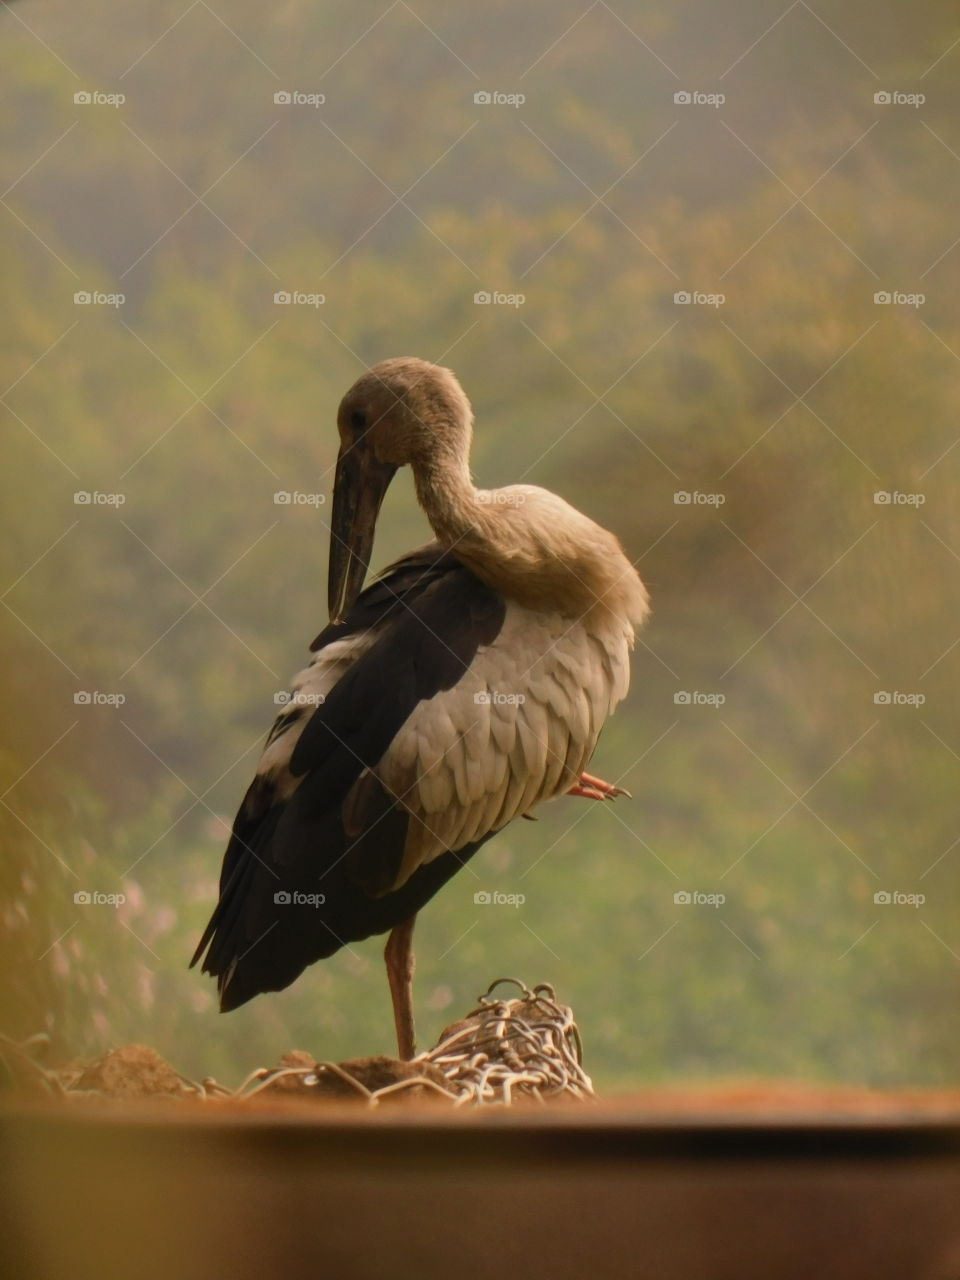 Bird Photography-The Asian openbill or Asian openbill stork (Anastomus oscitans) is a large wading bird in the stork family Ciconiidae. This distinctive stork is found mainly in the Indian subcontinent and Southeast Asia.They have wetland habitat.